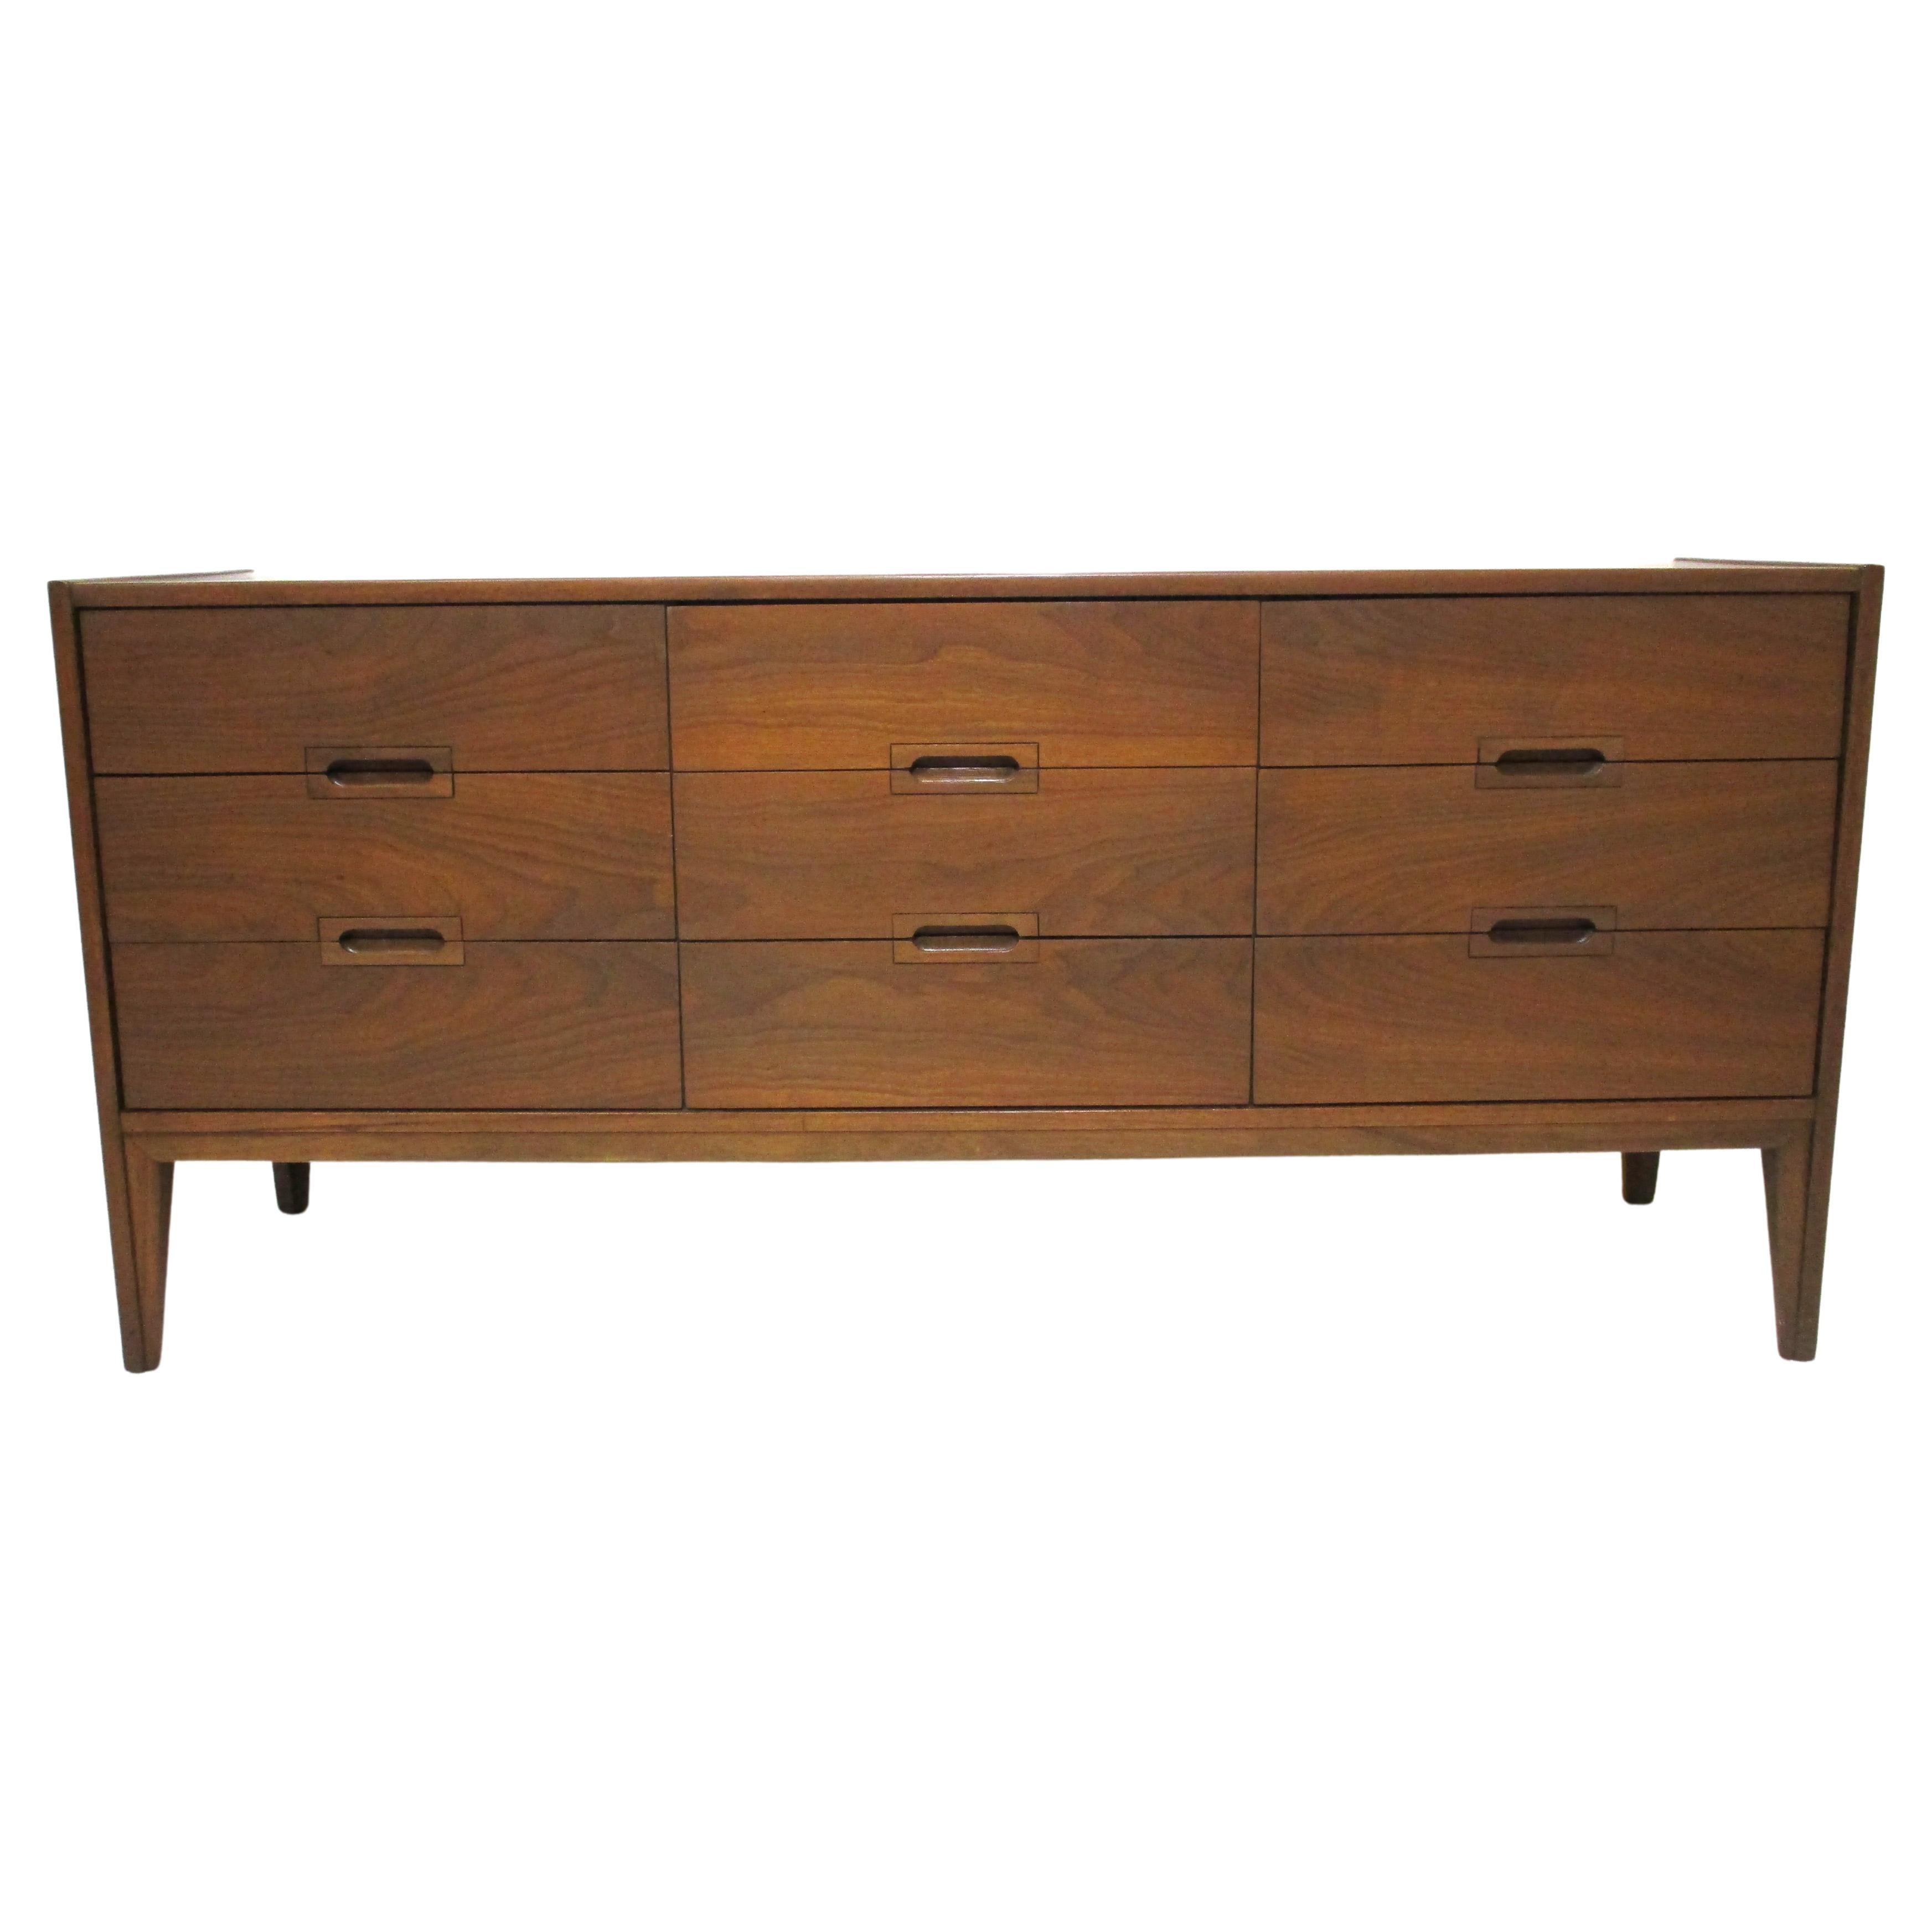 Mid Century Walnut Dresser Chest in the Style of John Keal and Brown Saltman